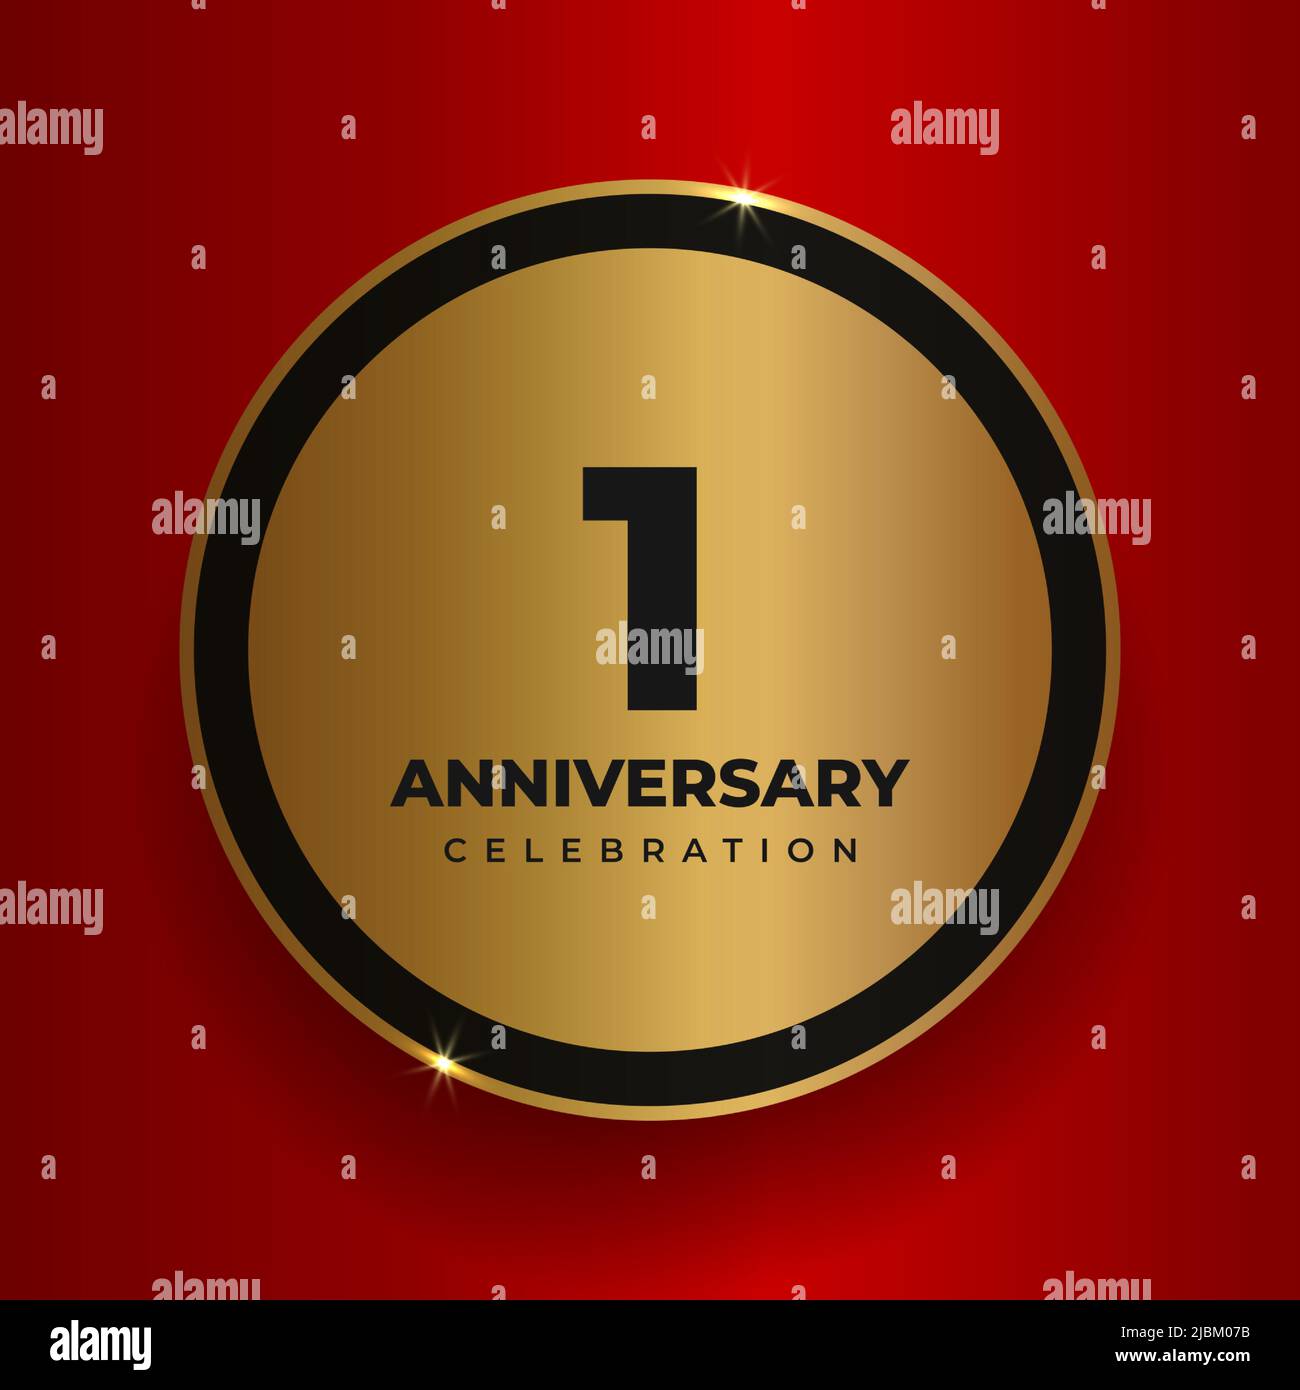 1st year anniversary celebration background. Celebrating 1st anniversary event party poster template. Vector golden circle with numbers and text on Stock Vector